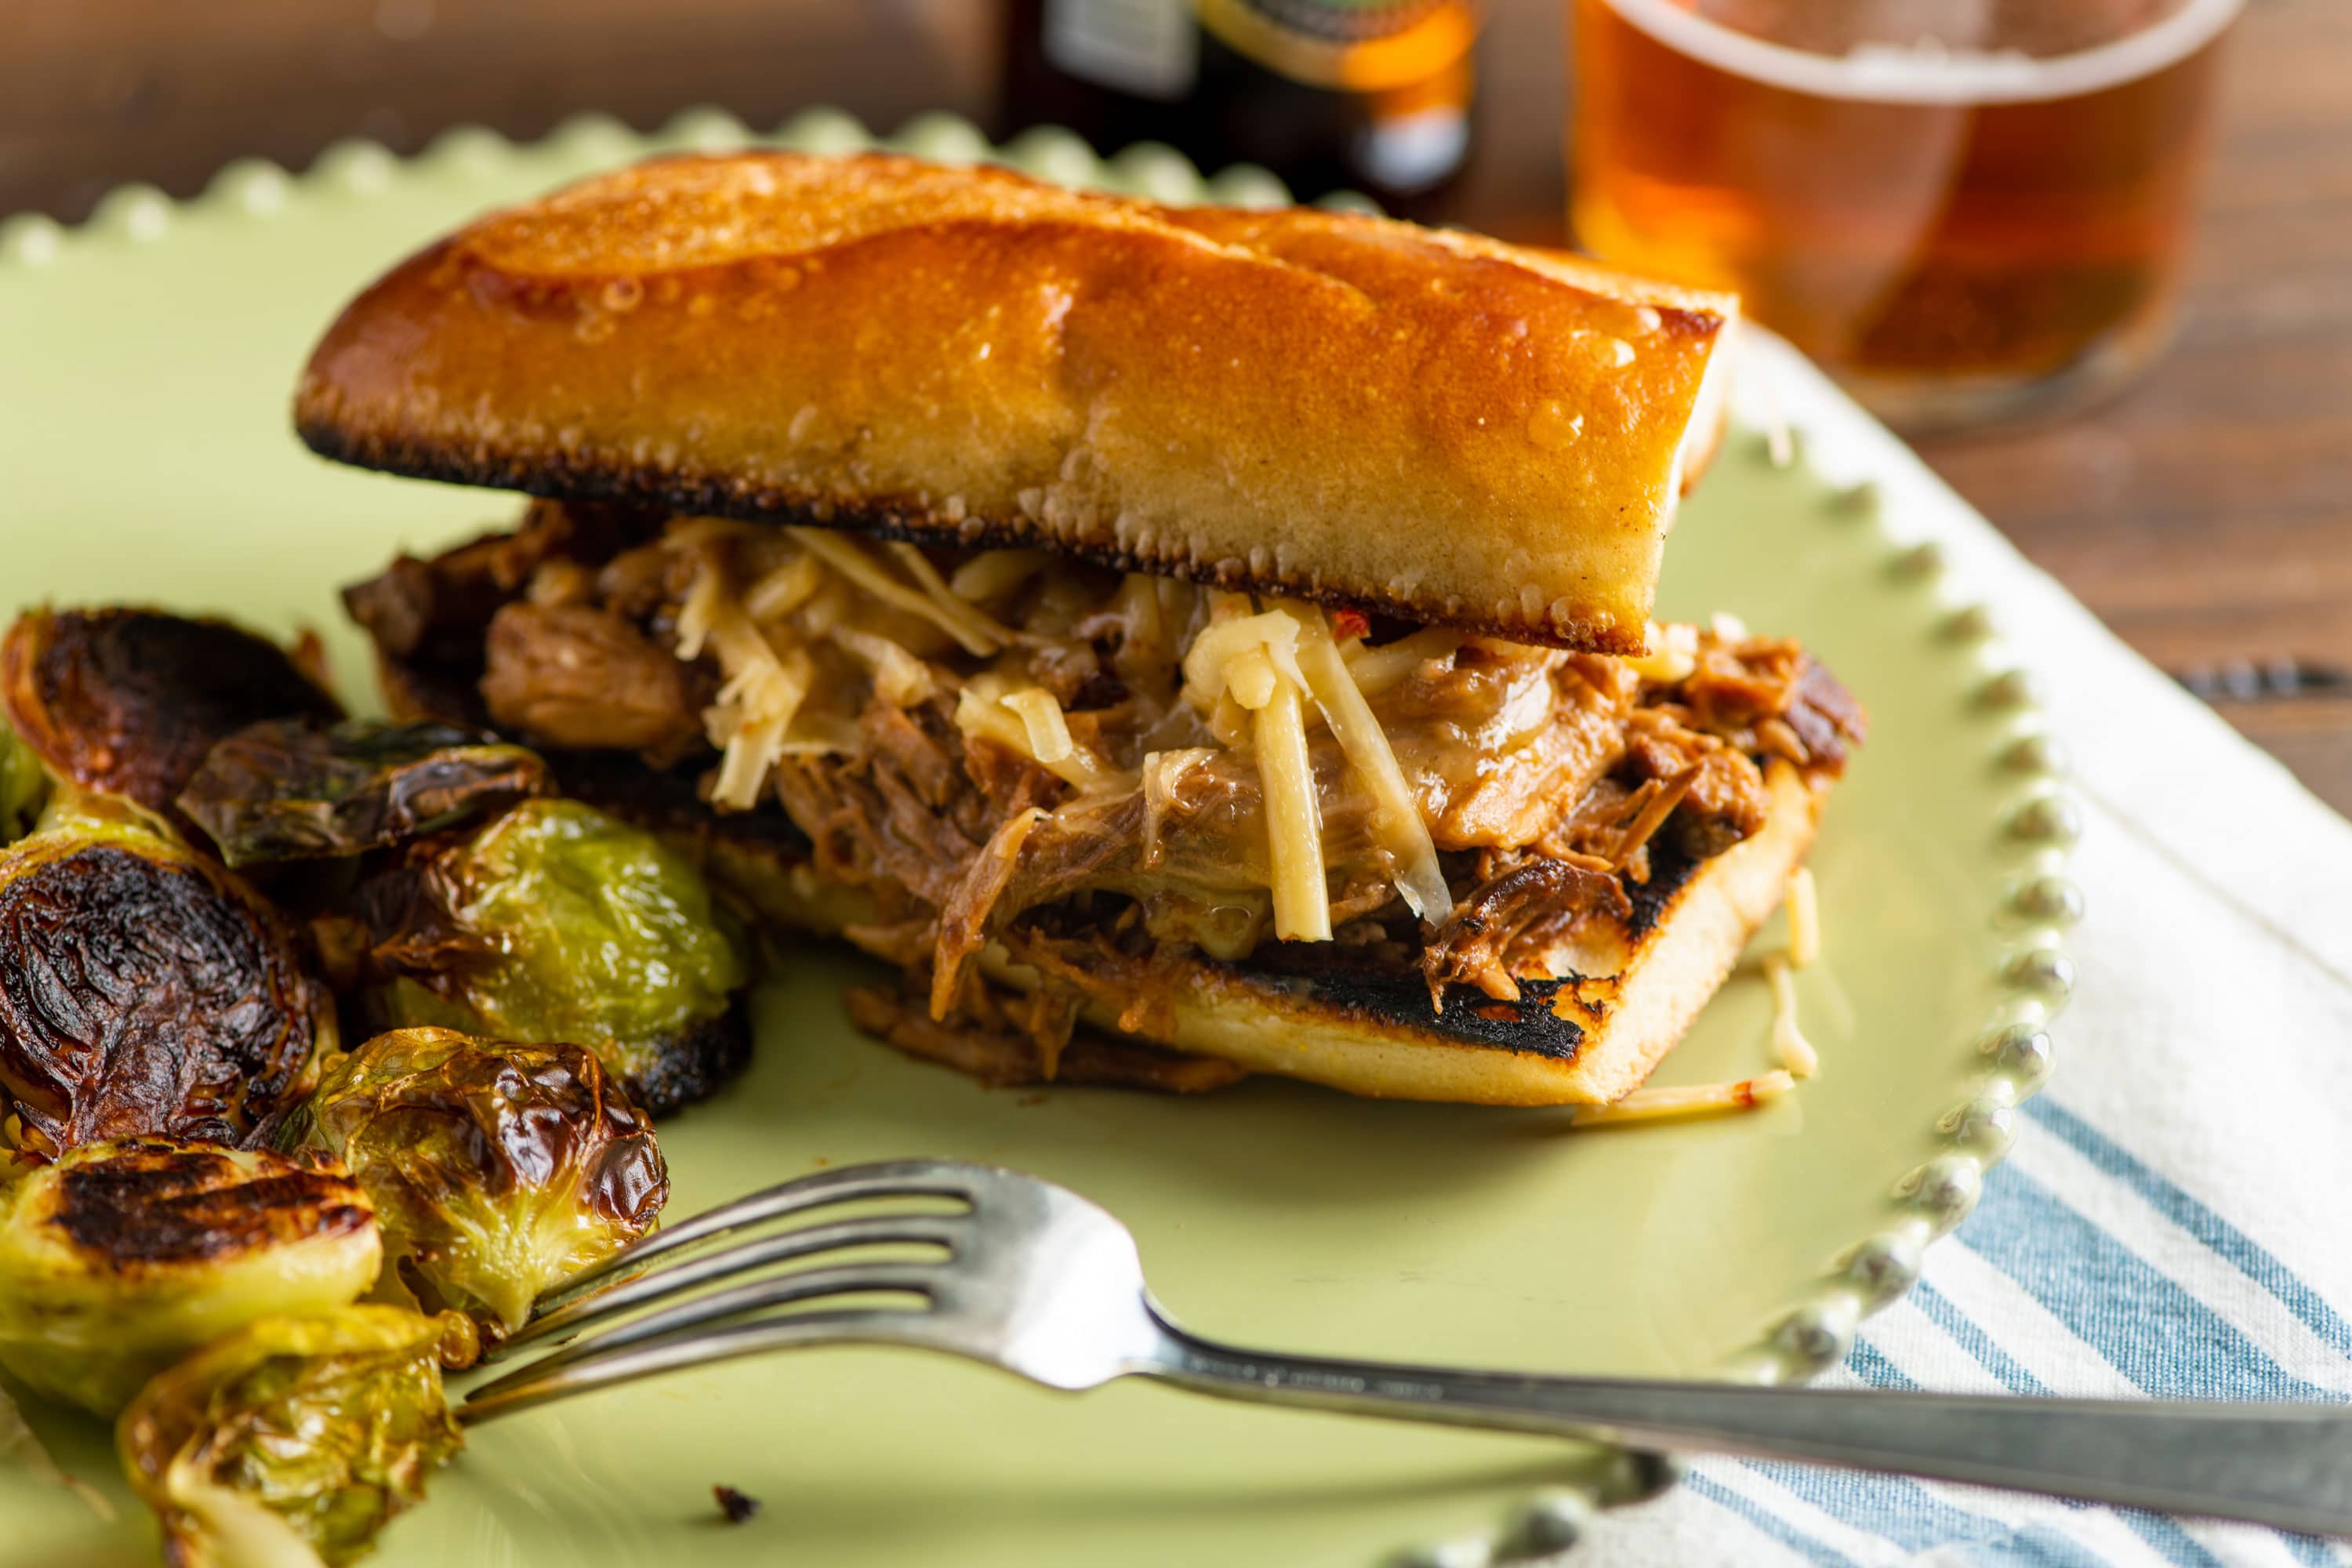 Bbq Pulled Pork Recipe Slow Cooker | 21